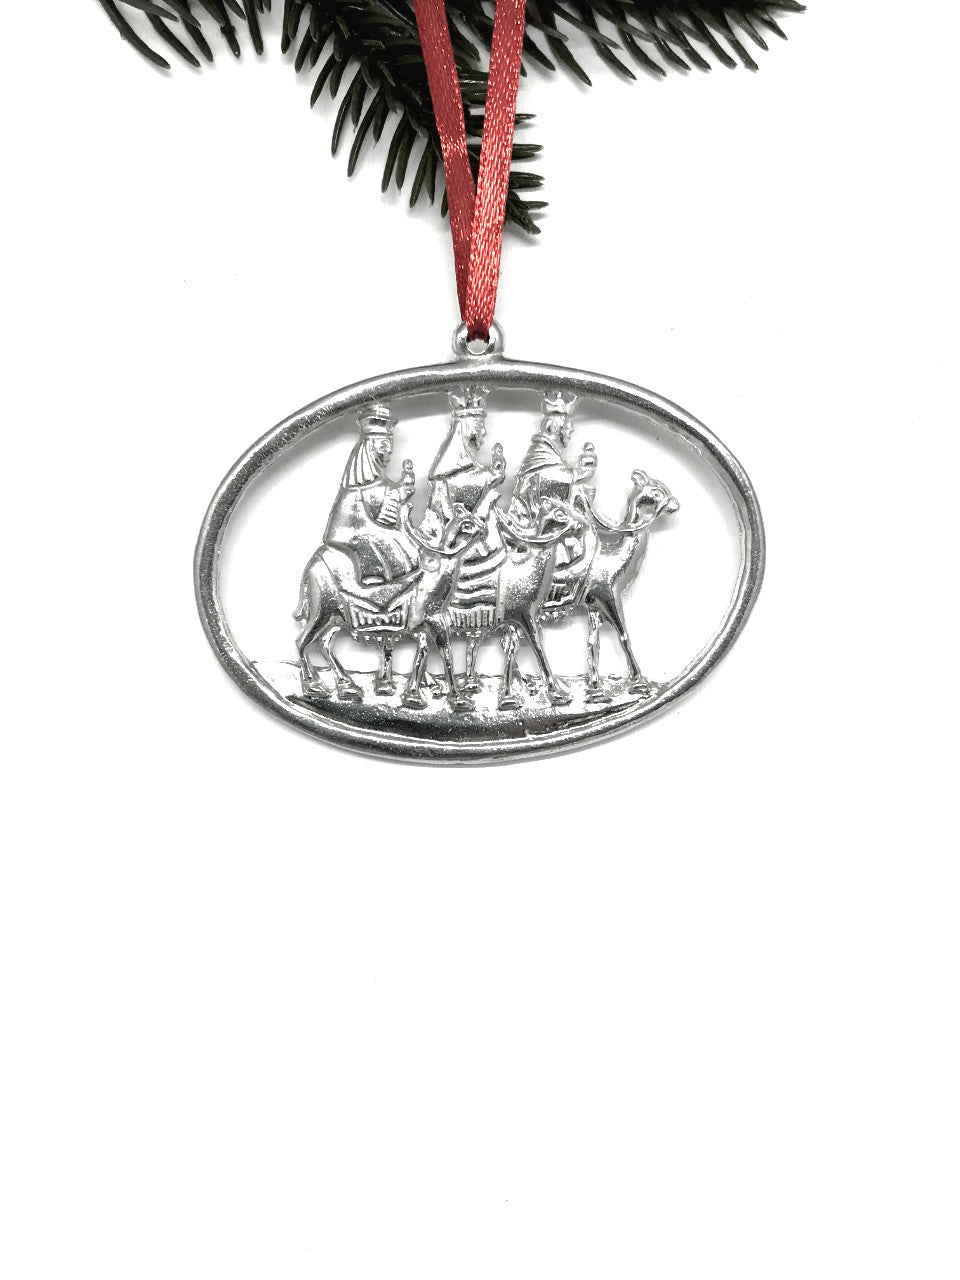 966 Wisemen Wise Men Nativity Religious Oval Christmas Ornament Pewter - House of Morgan Pewter